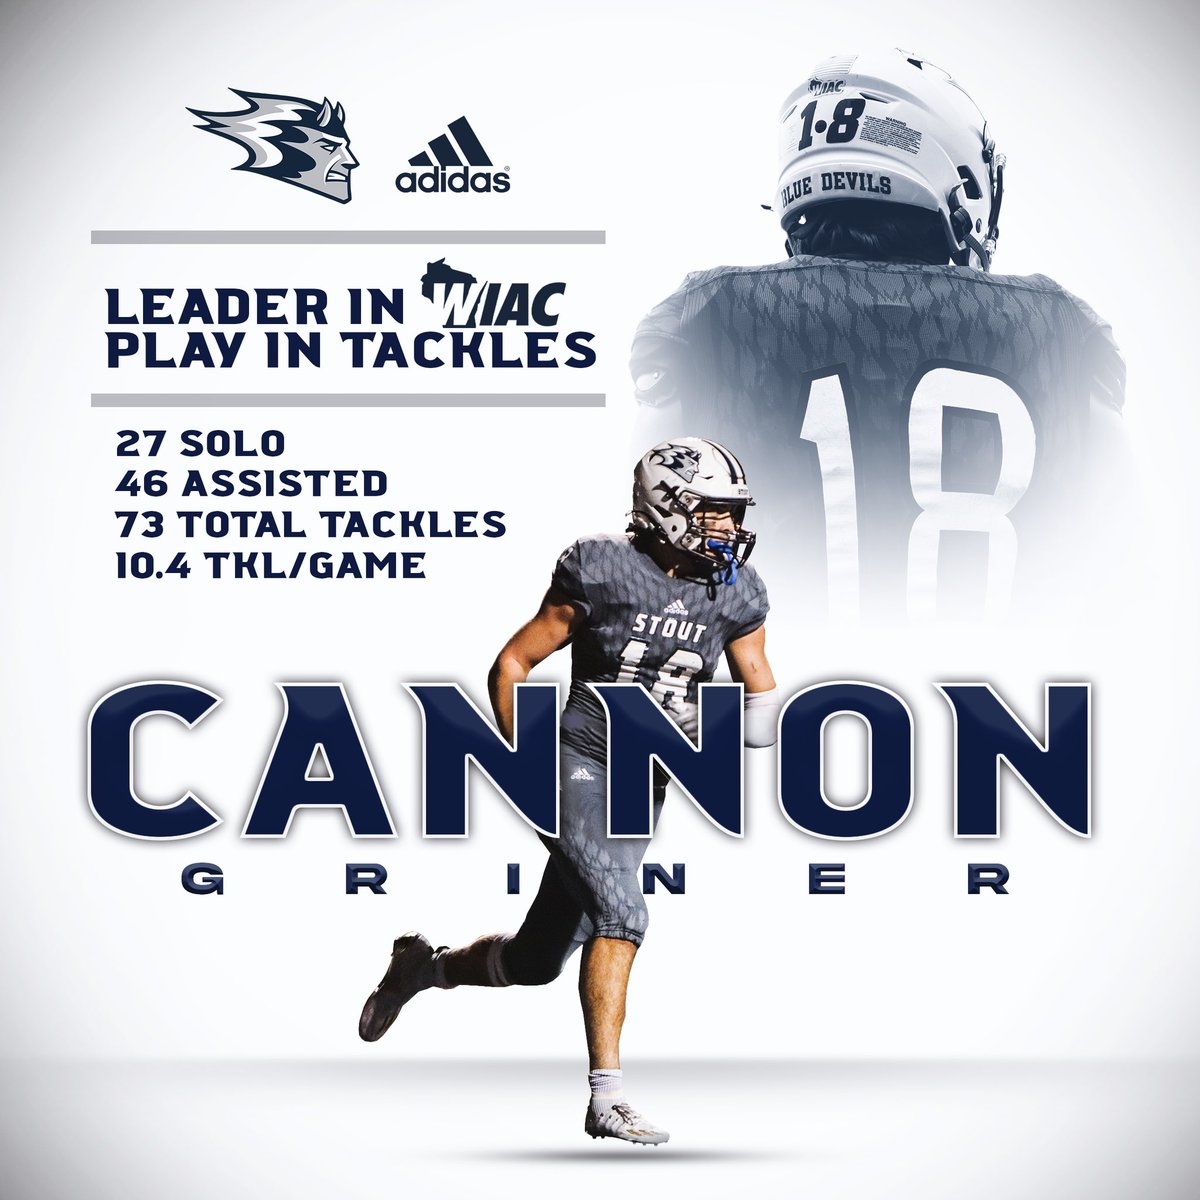 In conference play Cannon Griner led the WIAC with 73 total tackles! #BleedBlue T.P.C.